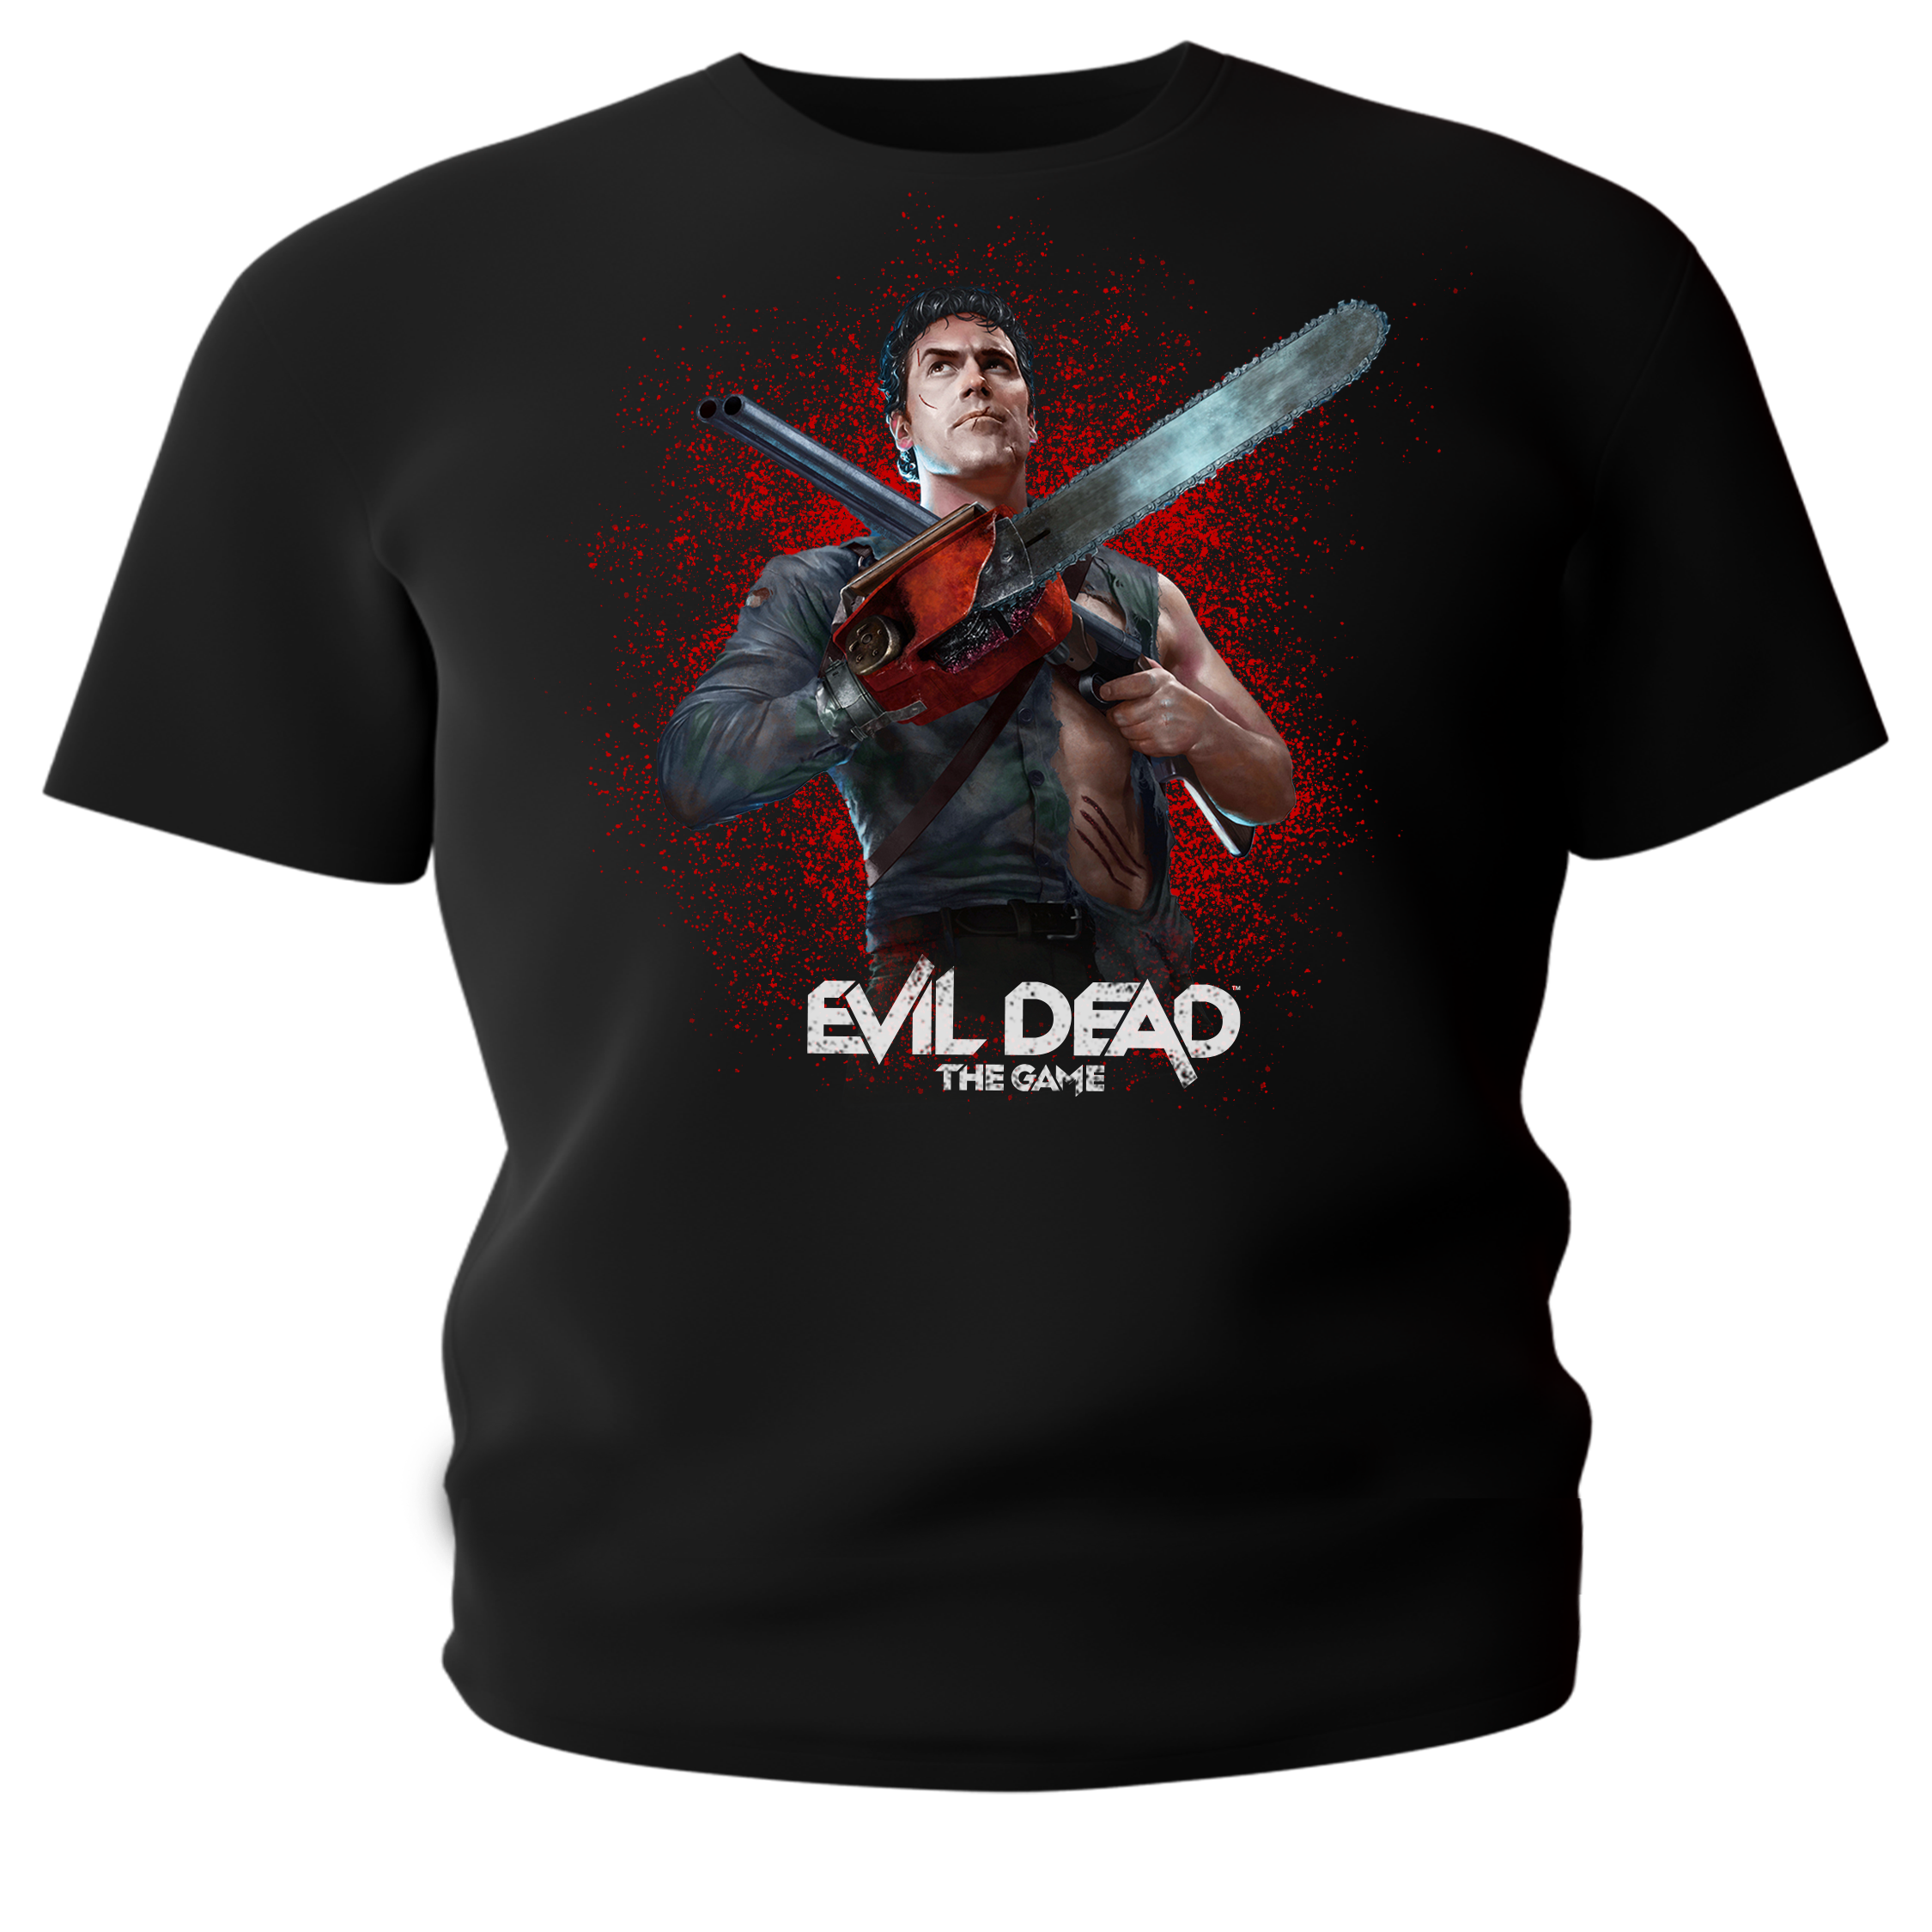 Evil Dead: The Game Collector's Edition T Shirt Size 2XL Brand New